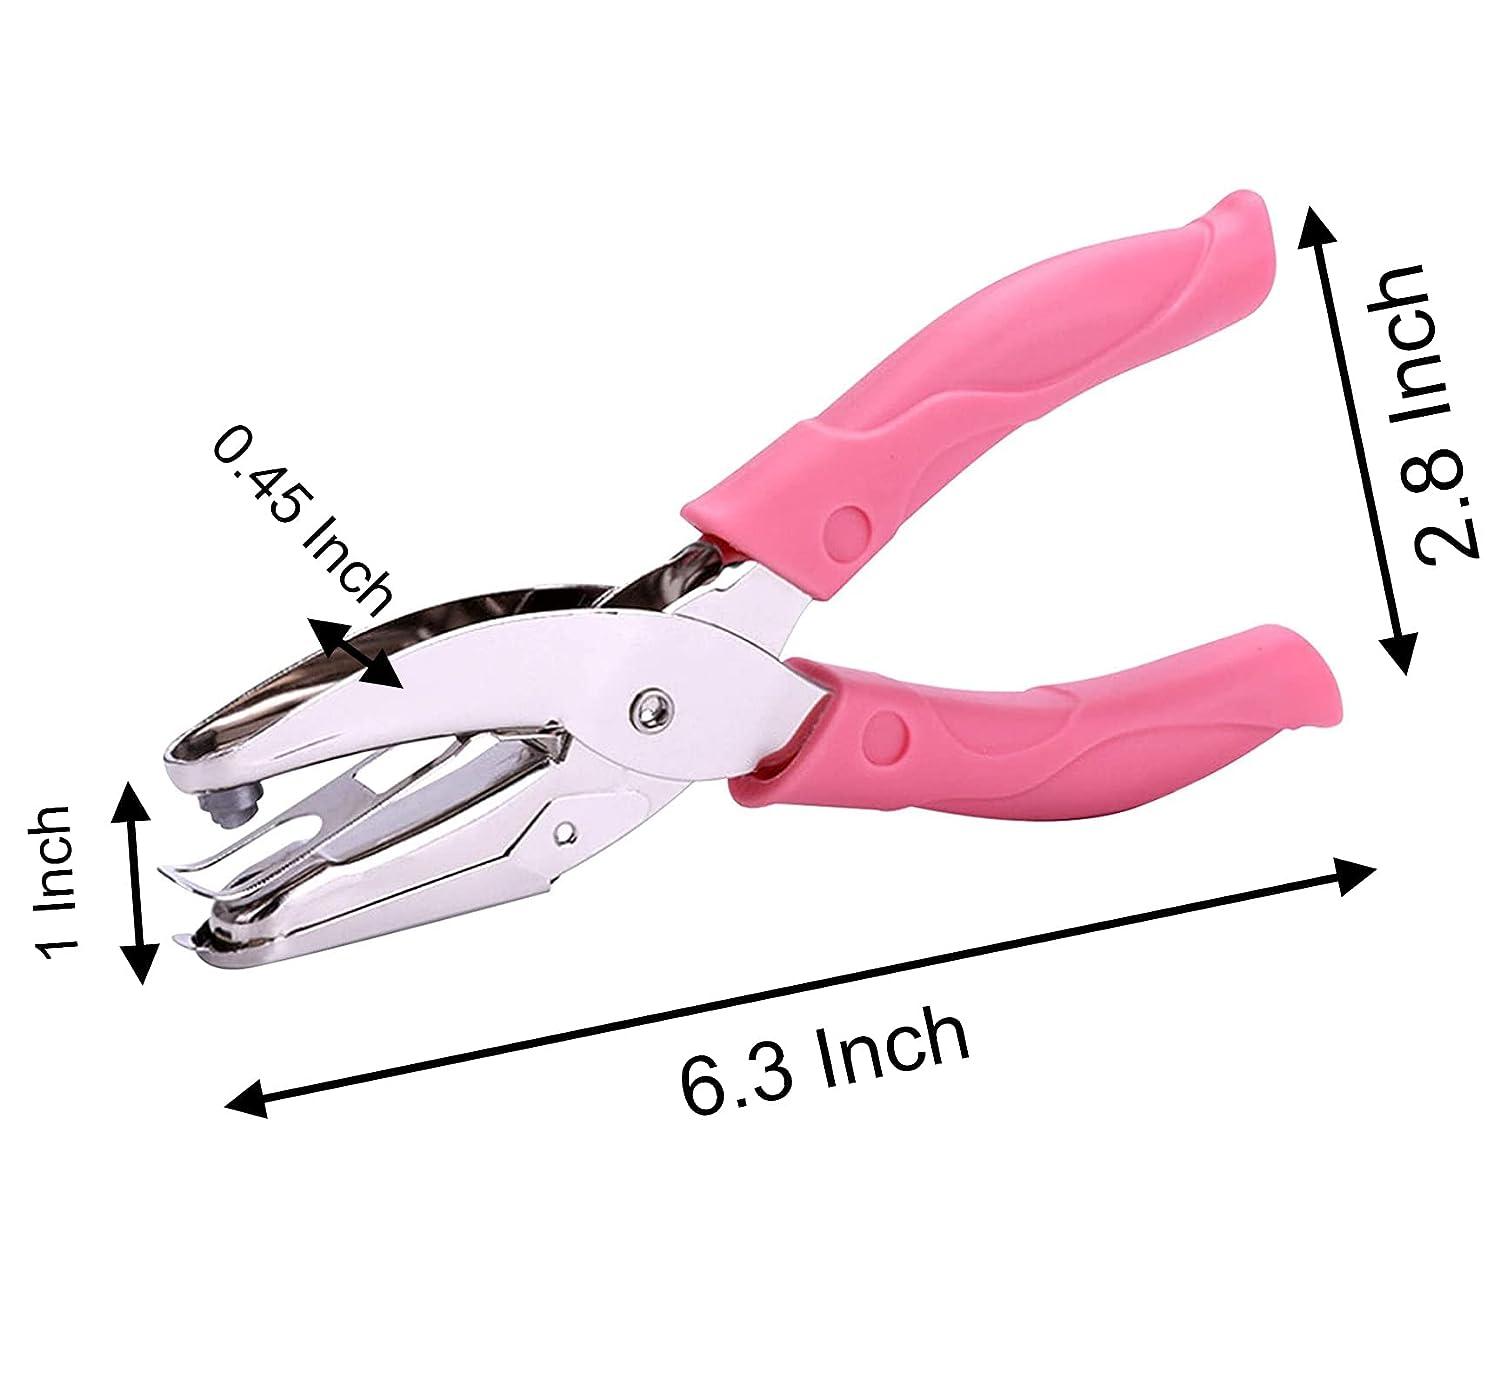 1 Pack 6.3 Inch Length 1/4 Inch Diameter of Heart Shape Hole Handheld  Single Paper Hole Punch Puncher with Pink Soft Thick Leather Cover(Heart  1/4 inch)